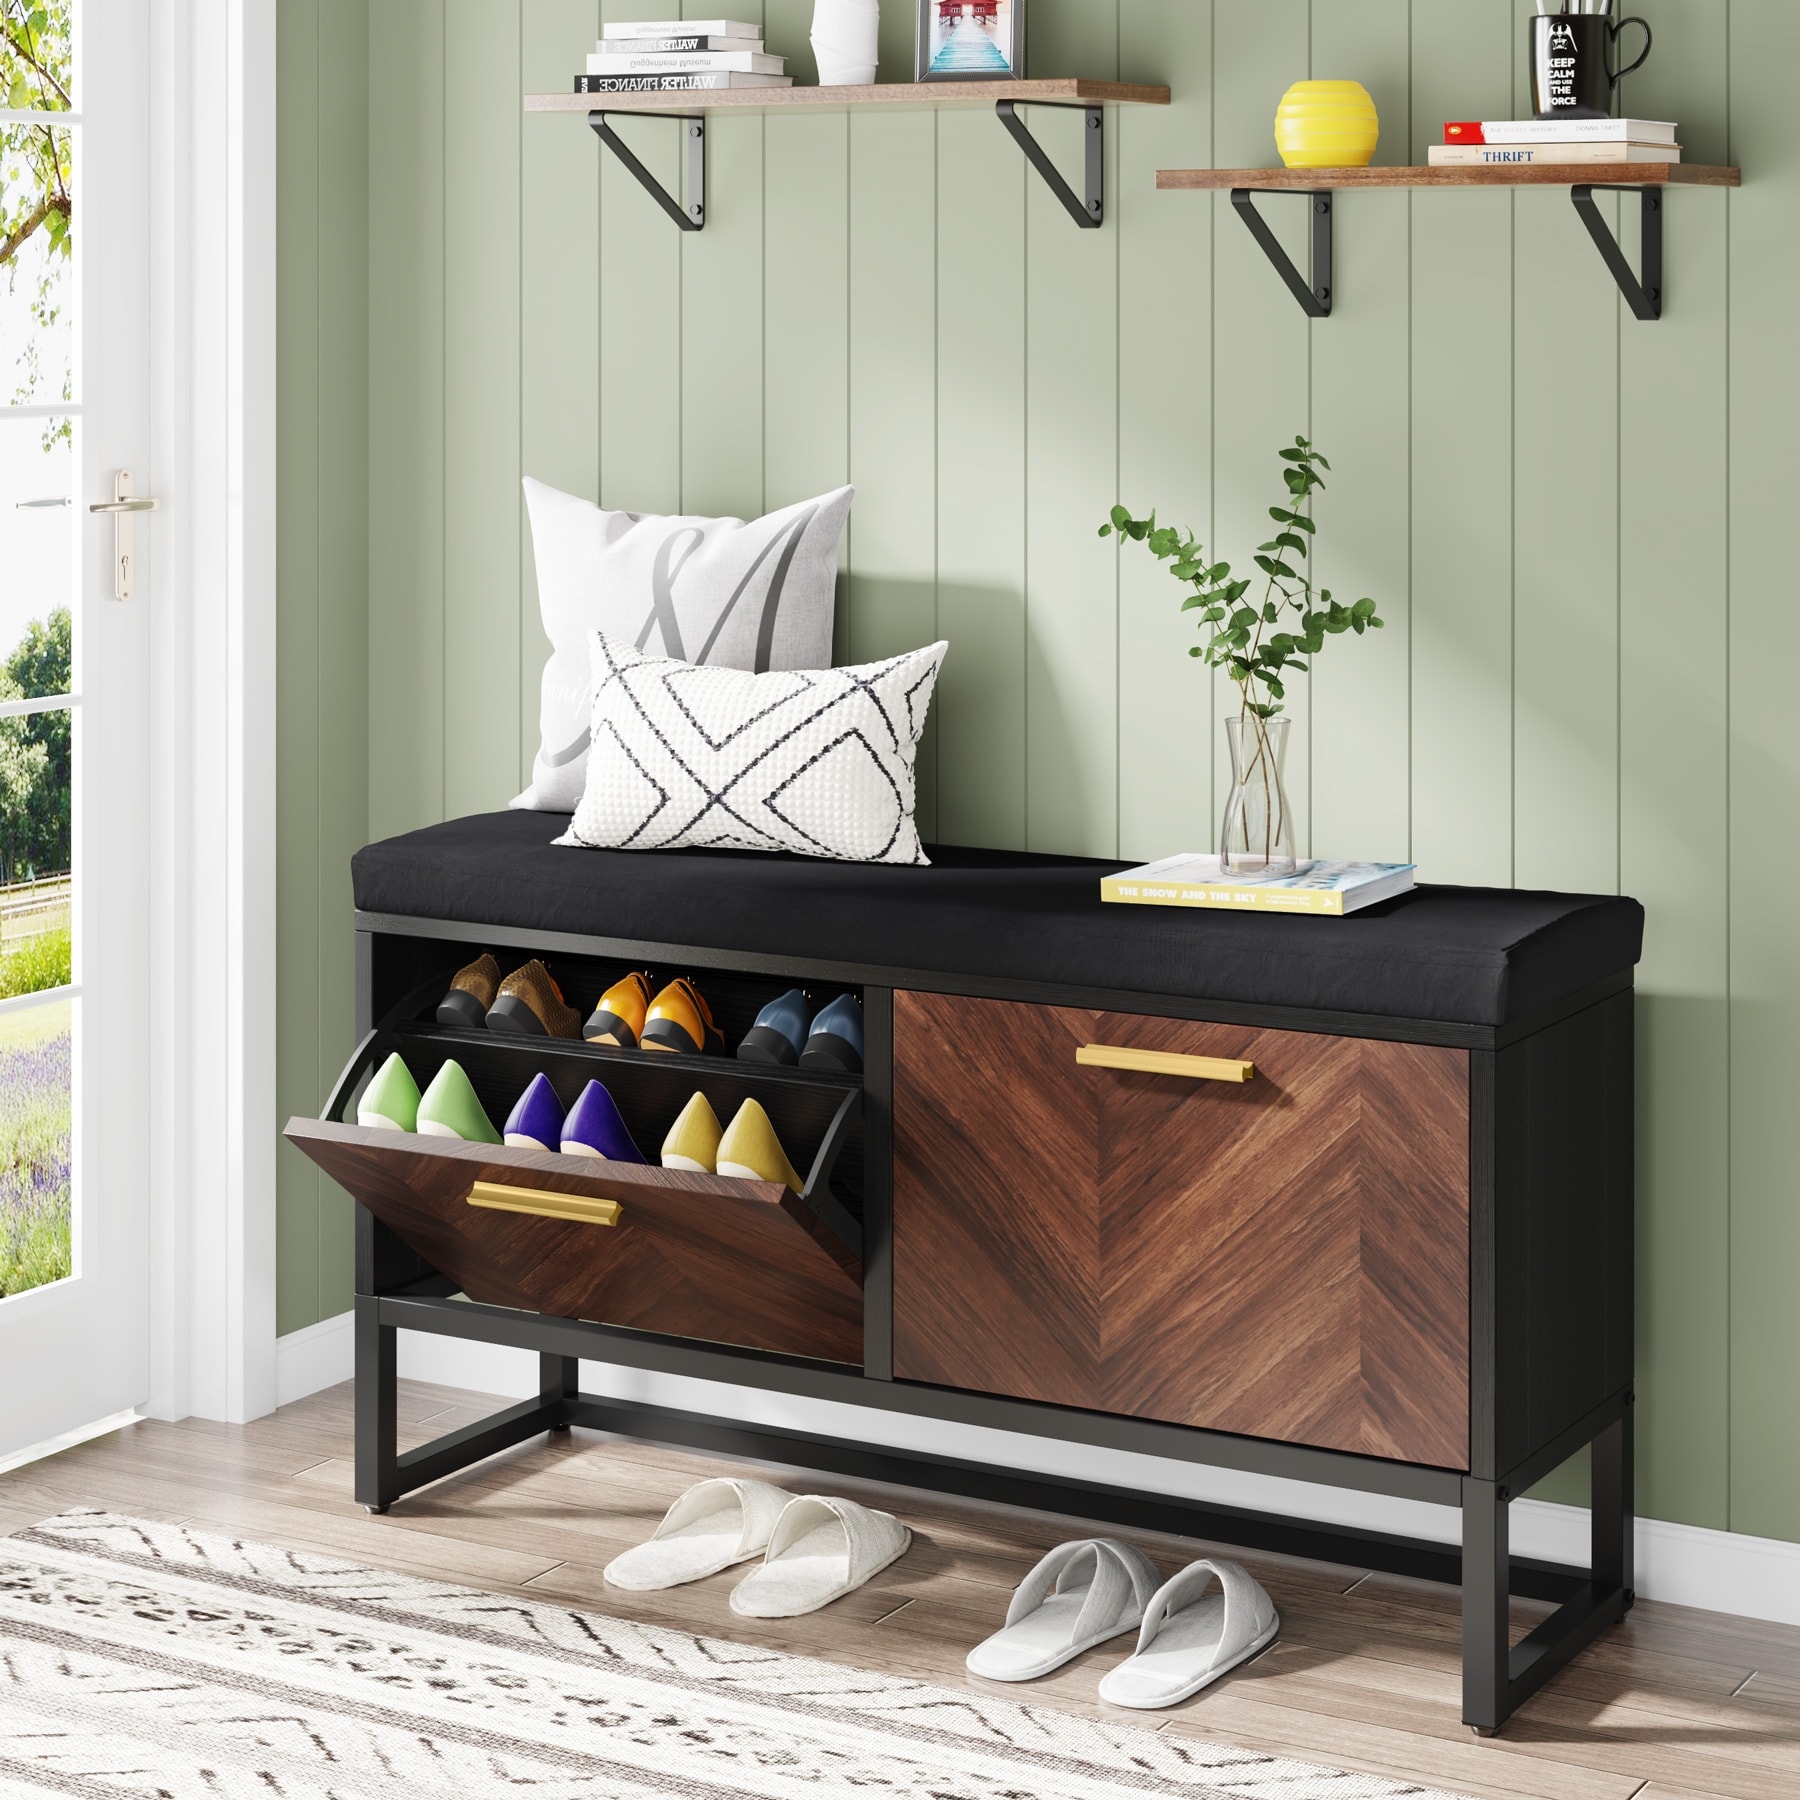 https://ak1.ostkcdn.com/images/products/is/images/direct/f1b998fd6f93749d0bc212dcc56c2cff5593f950/10-12-Pairs-Cushioned-Shoe-Storage-Bench-with-2-Flip-Drawers-and-Adjustable-Shelves.jpg